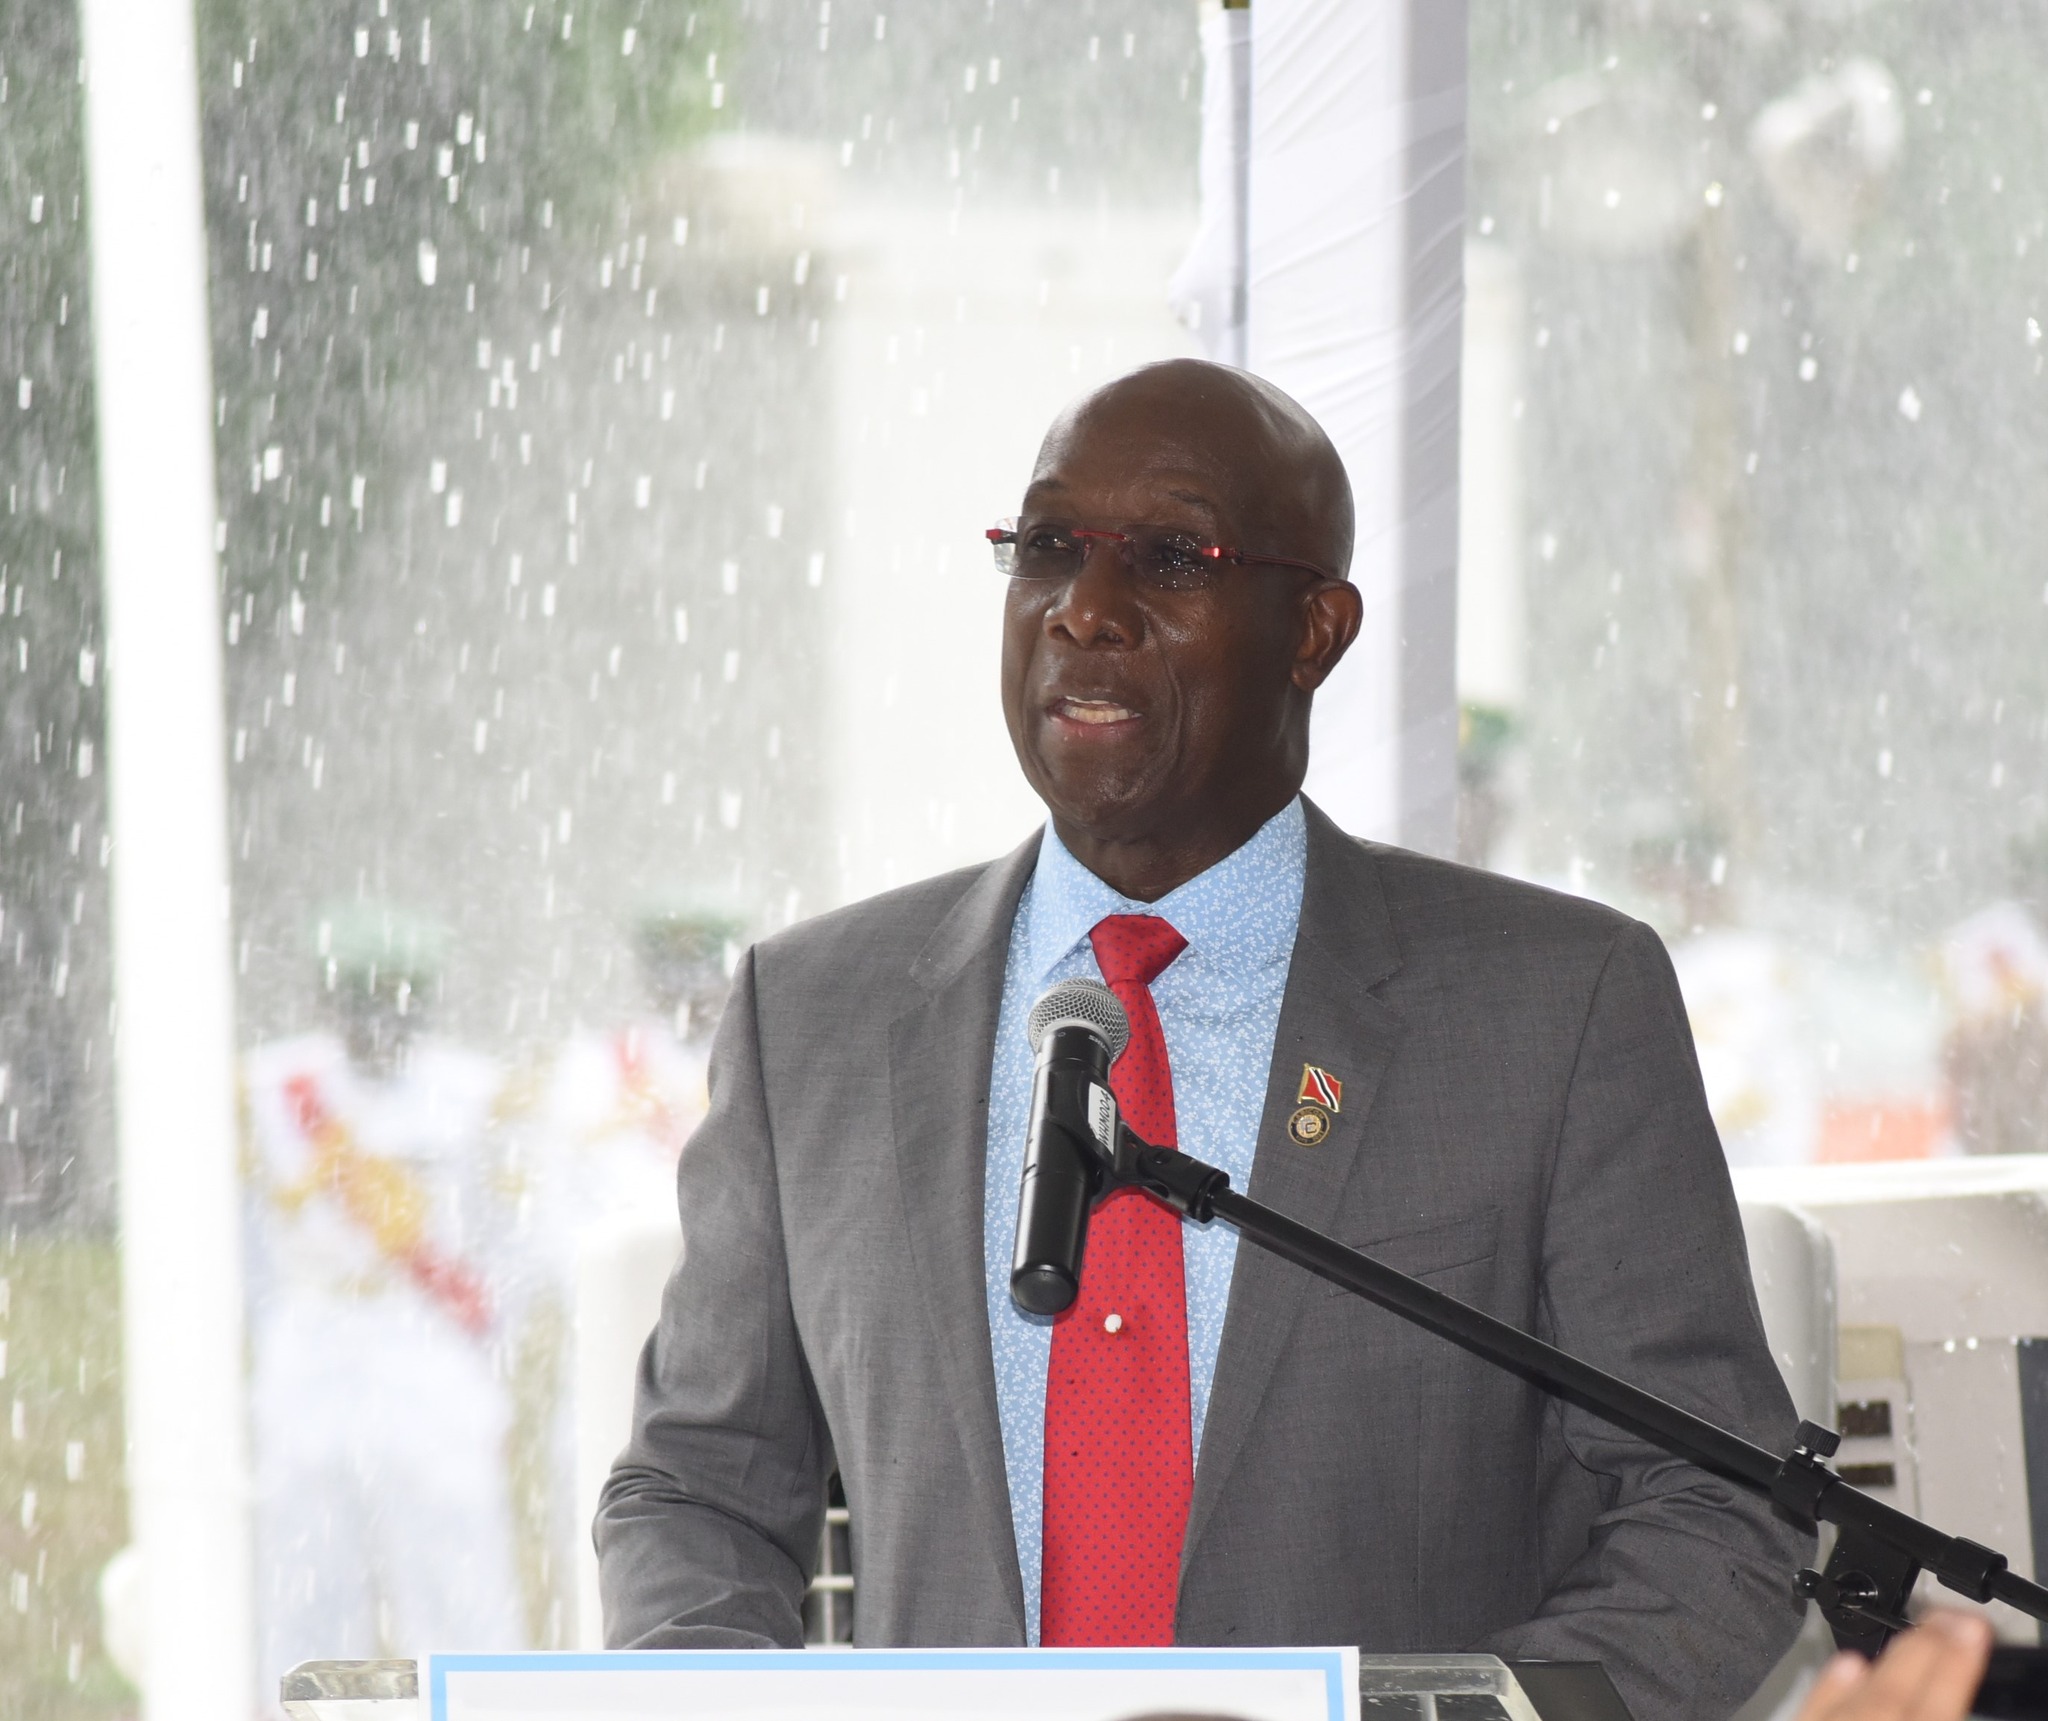 Caricom told that its accomplishments have been many